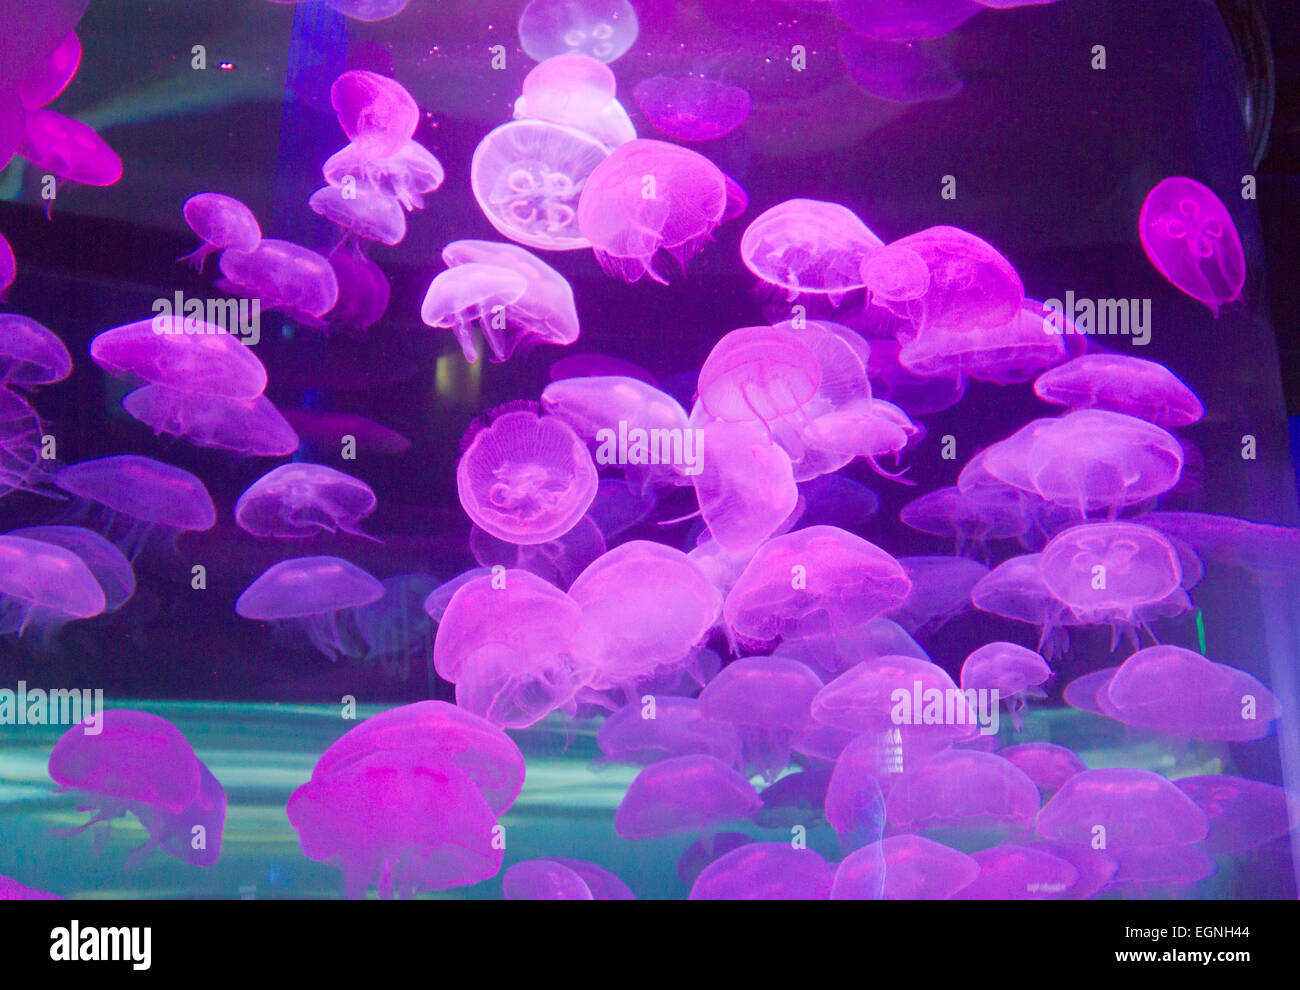 Moon jellyfish in an aquarium illuminated by colored light. Stock Photo